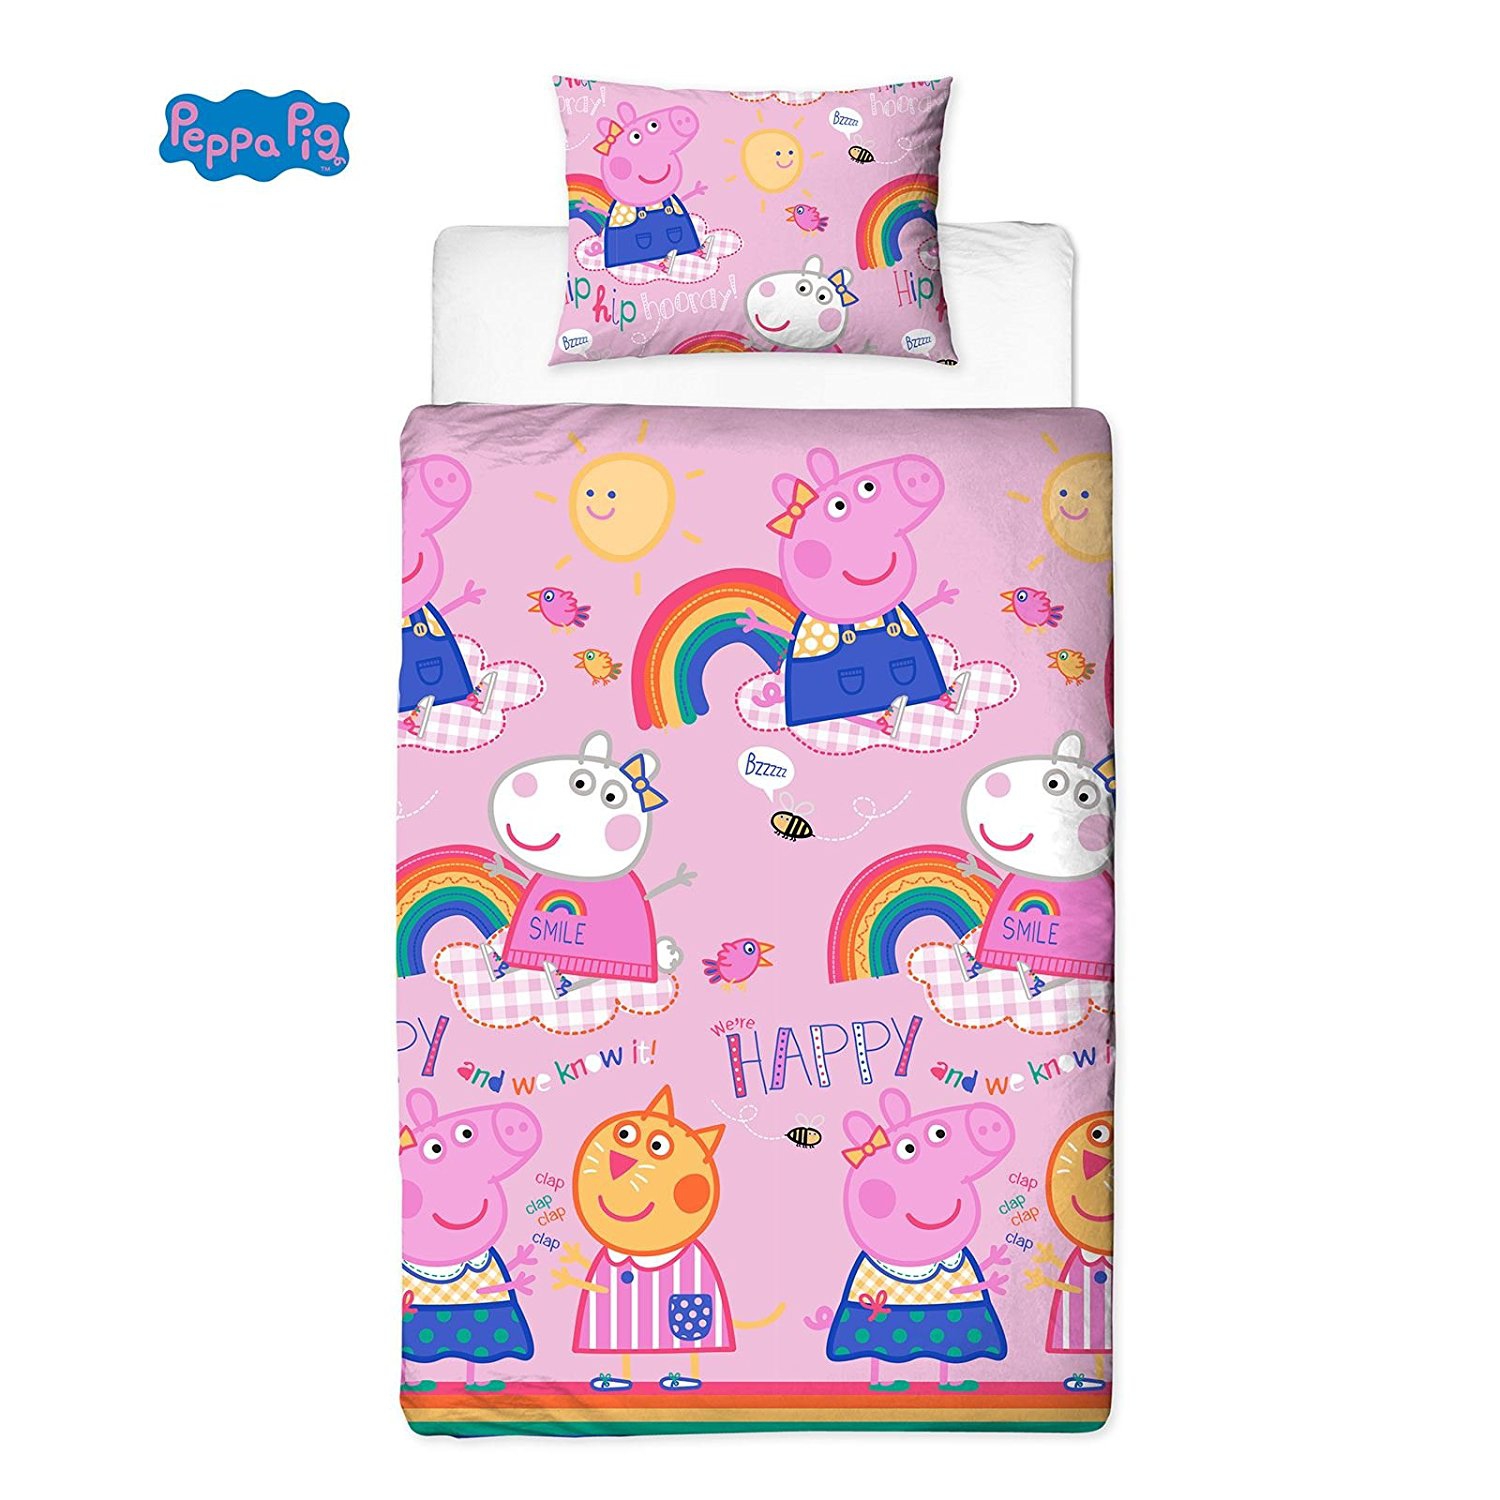 Peppa Pig Friends Hooray Rotary Single Bed Duvet Quilt Cover Set